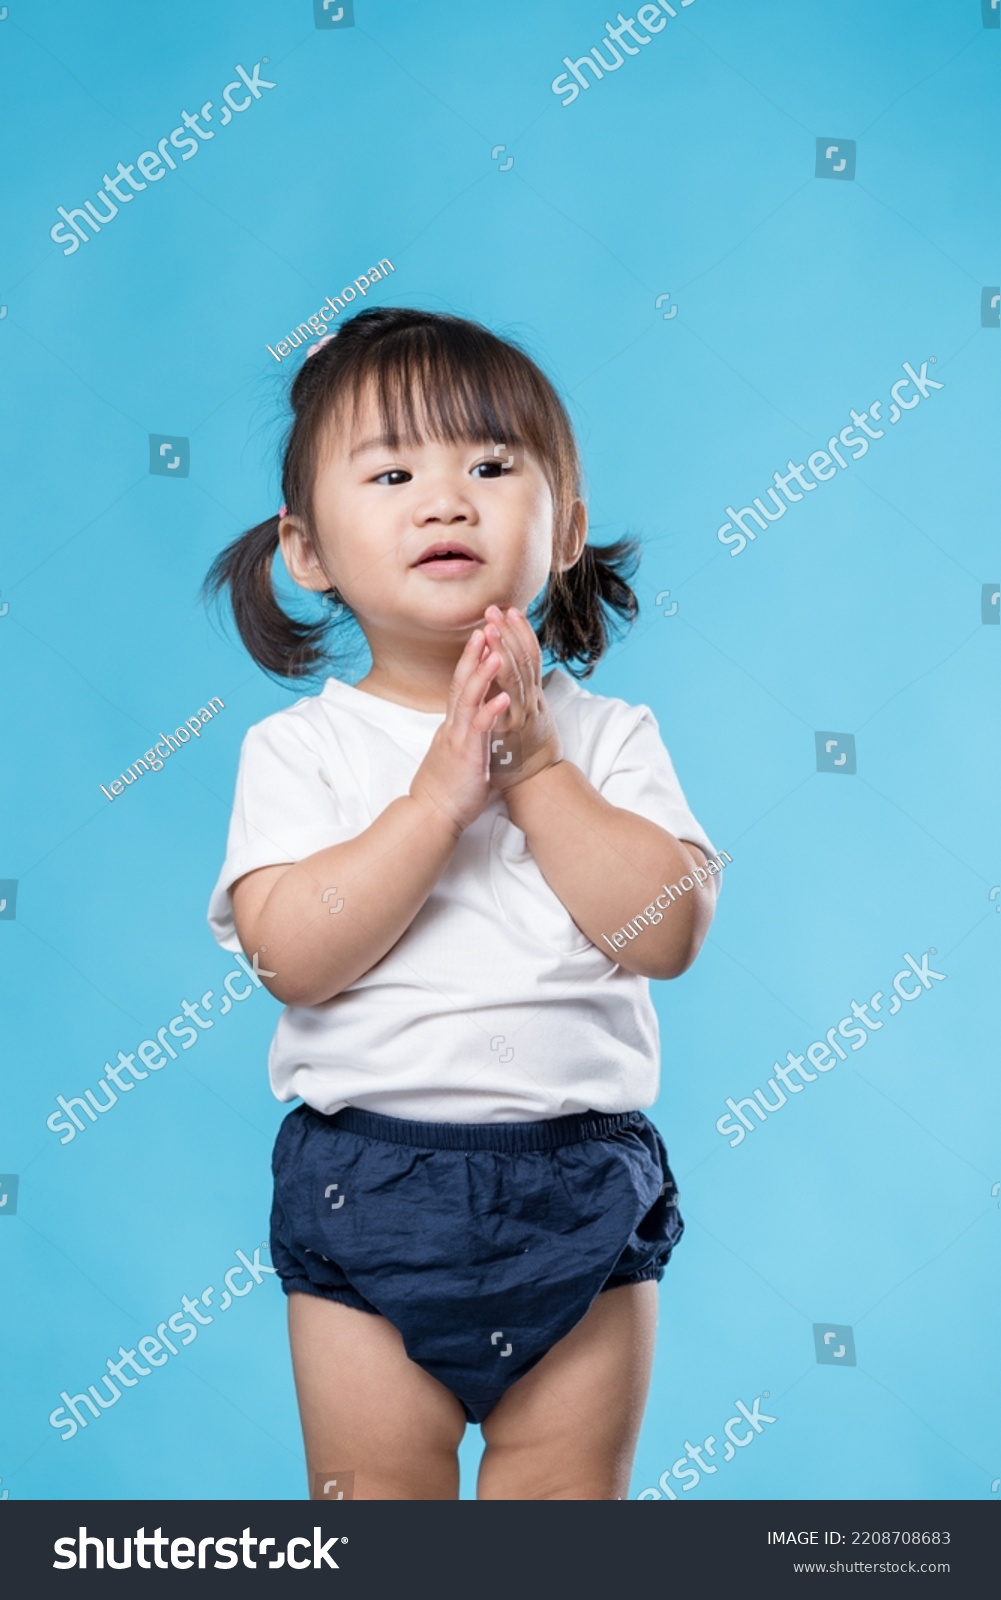 Little girl clap over blue background #2208708683